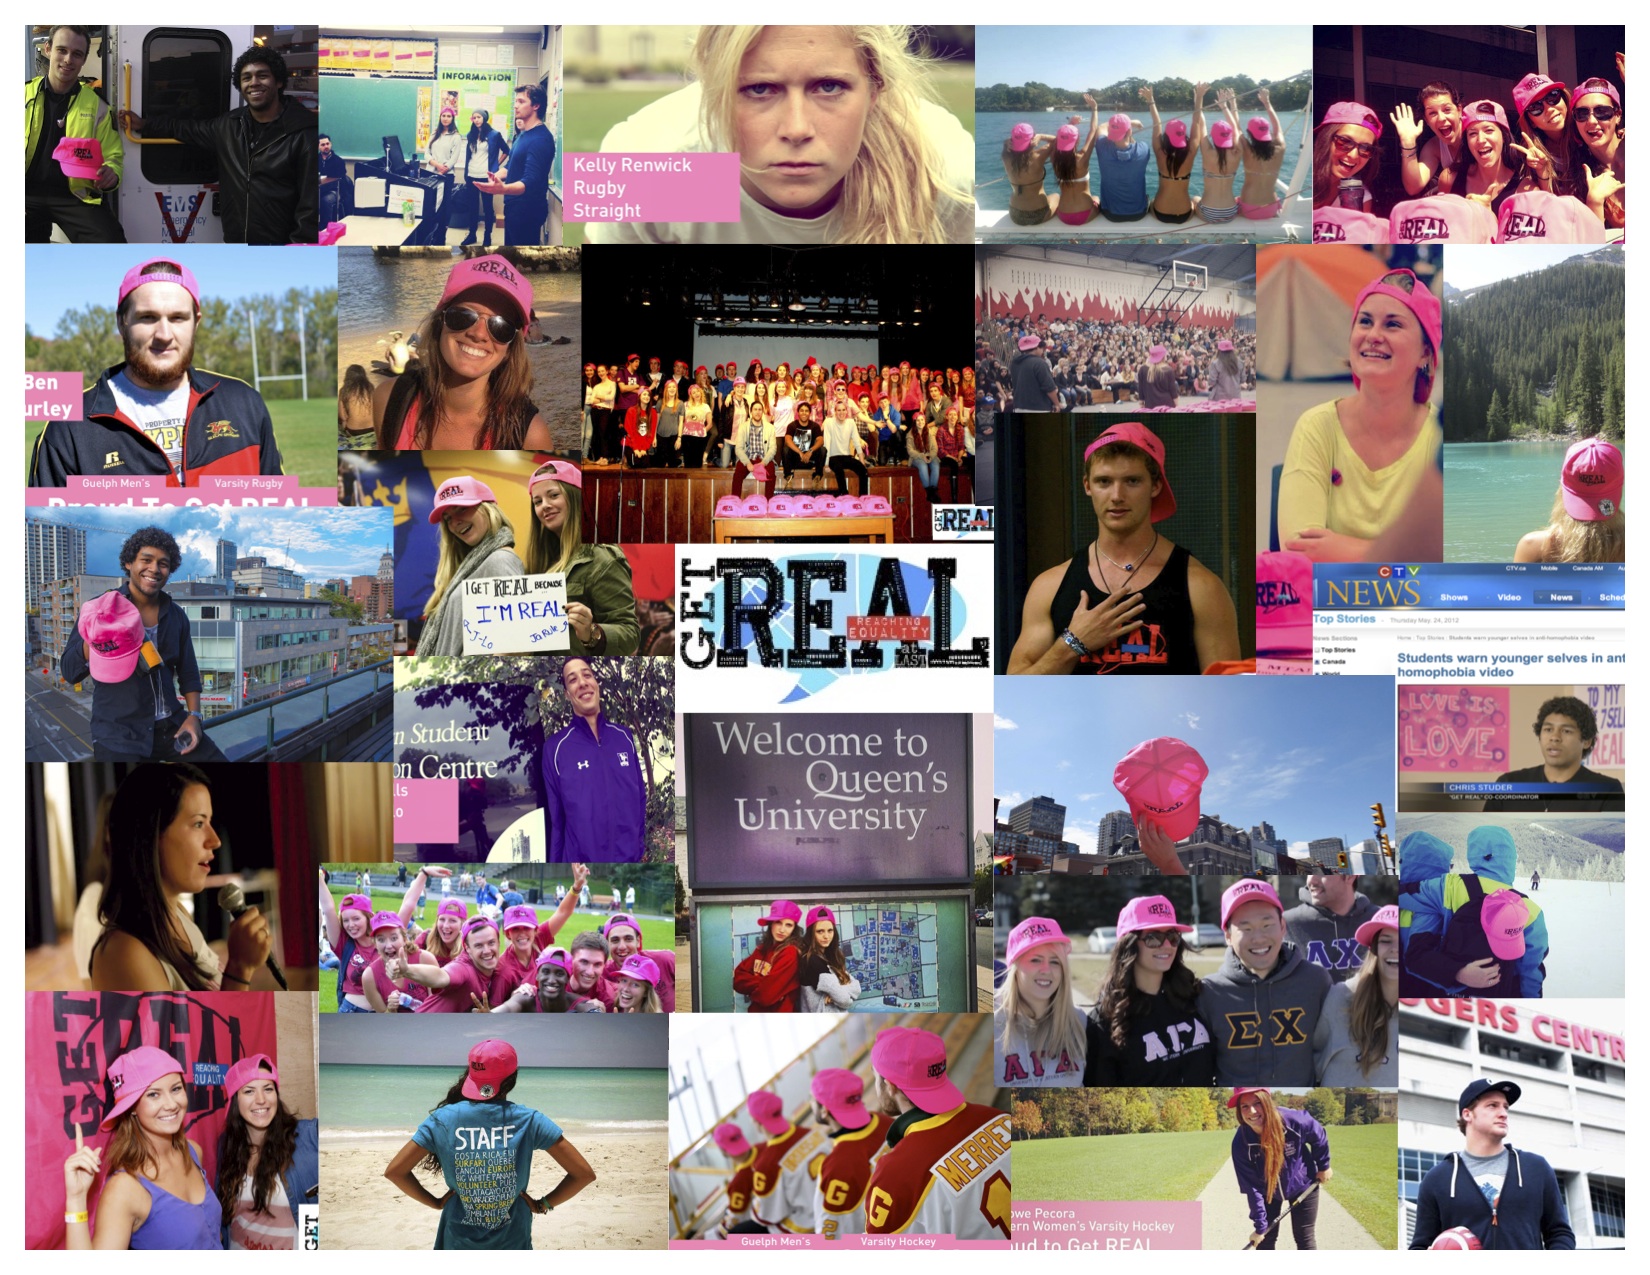 A Youth Movement Against Homophobia: Get REAL